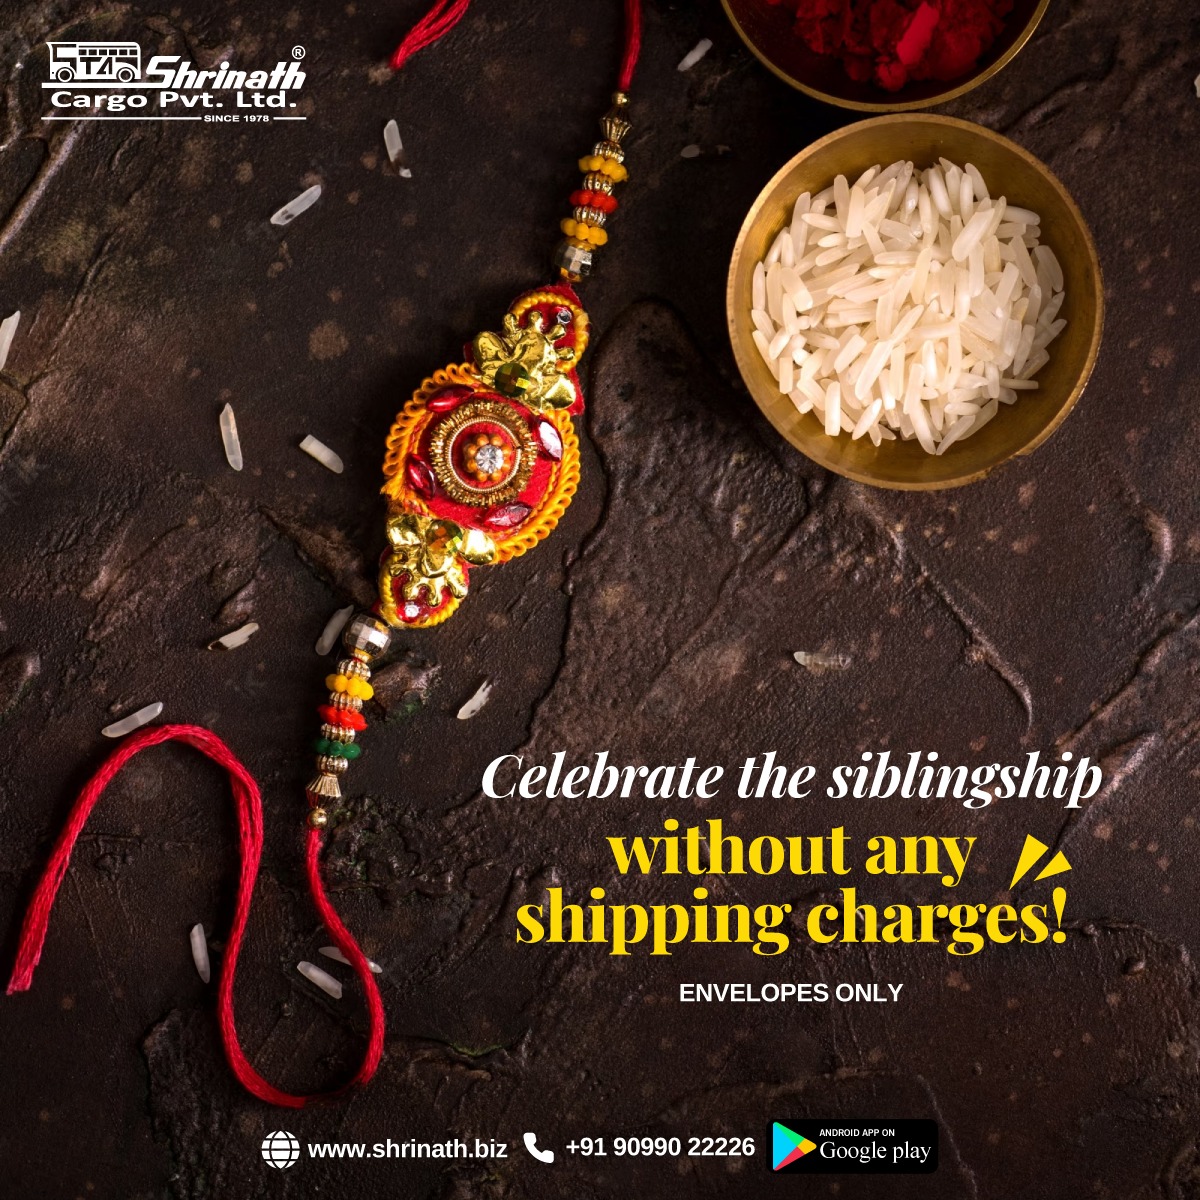 Ship rakhi for free without any hassle✨

Follow 3 simple steps -
1. Pack rakhi in an envelope
2. Write shipping details
3. Drop it at nearest Shrinath Cargo office
.
.
.
.
#ShrinathCargo #Cargo #cargoservice #dailyservice #cargotrucks #parcel #supplychainmanagement